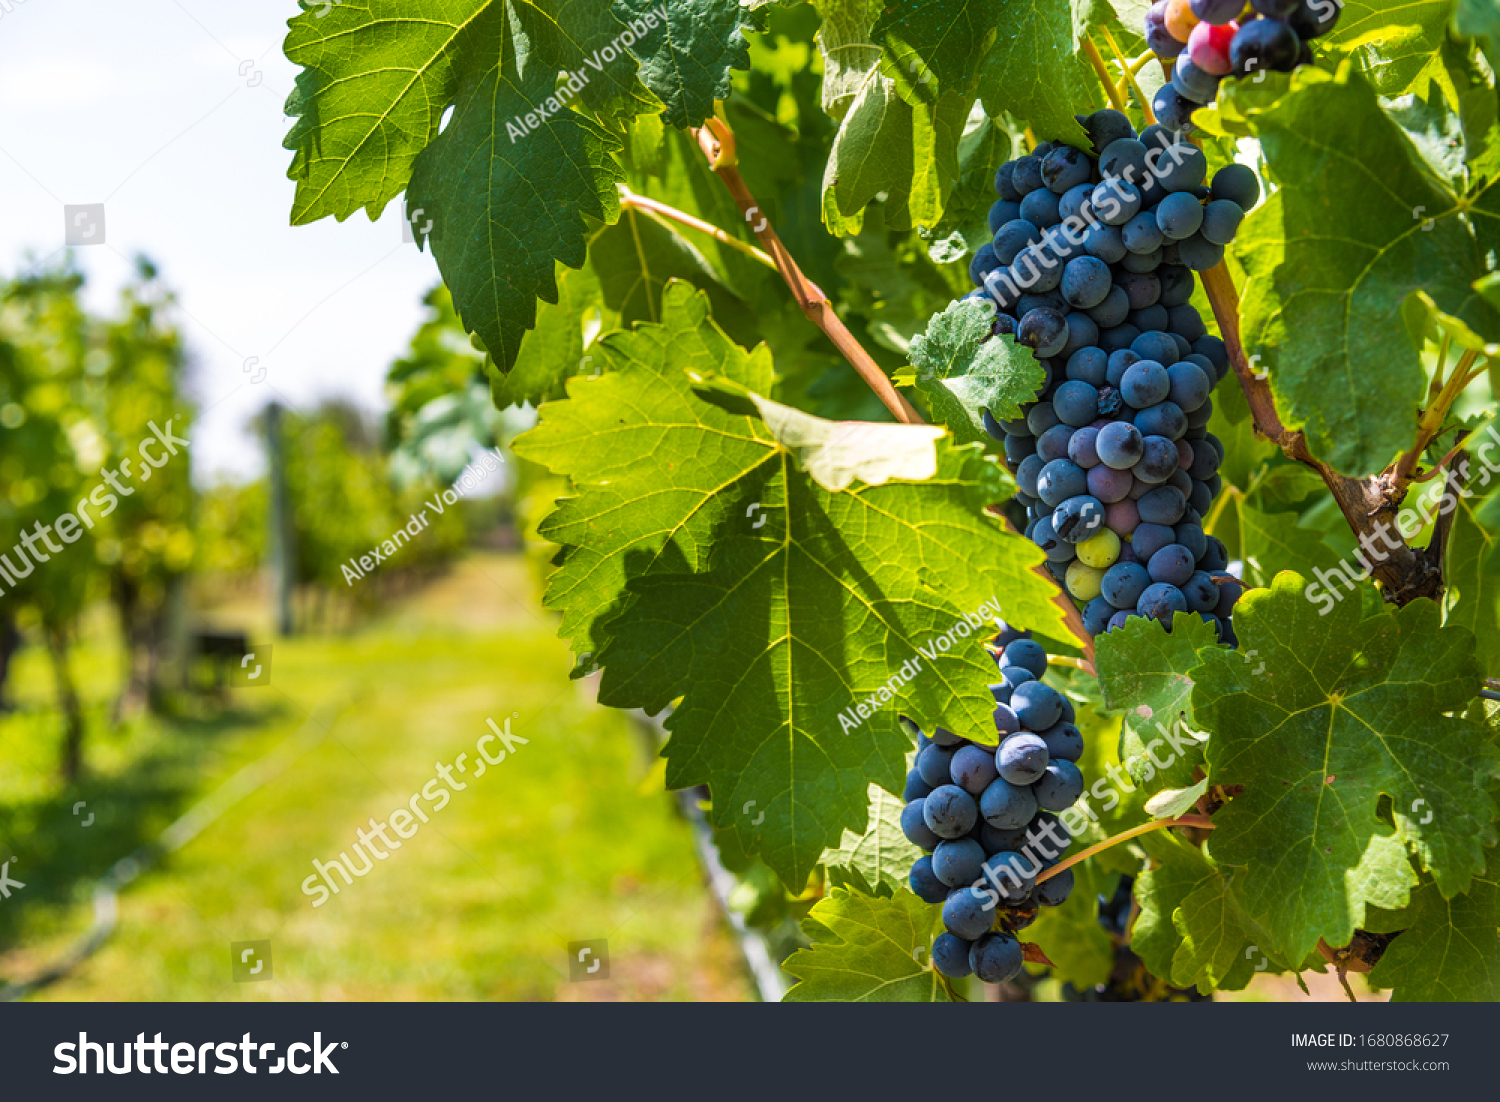 Red grapes on a vine in a vineyard in Mendoza on a sunny day #1680868627